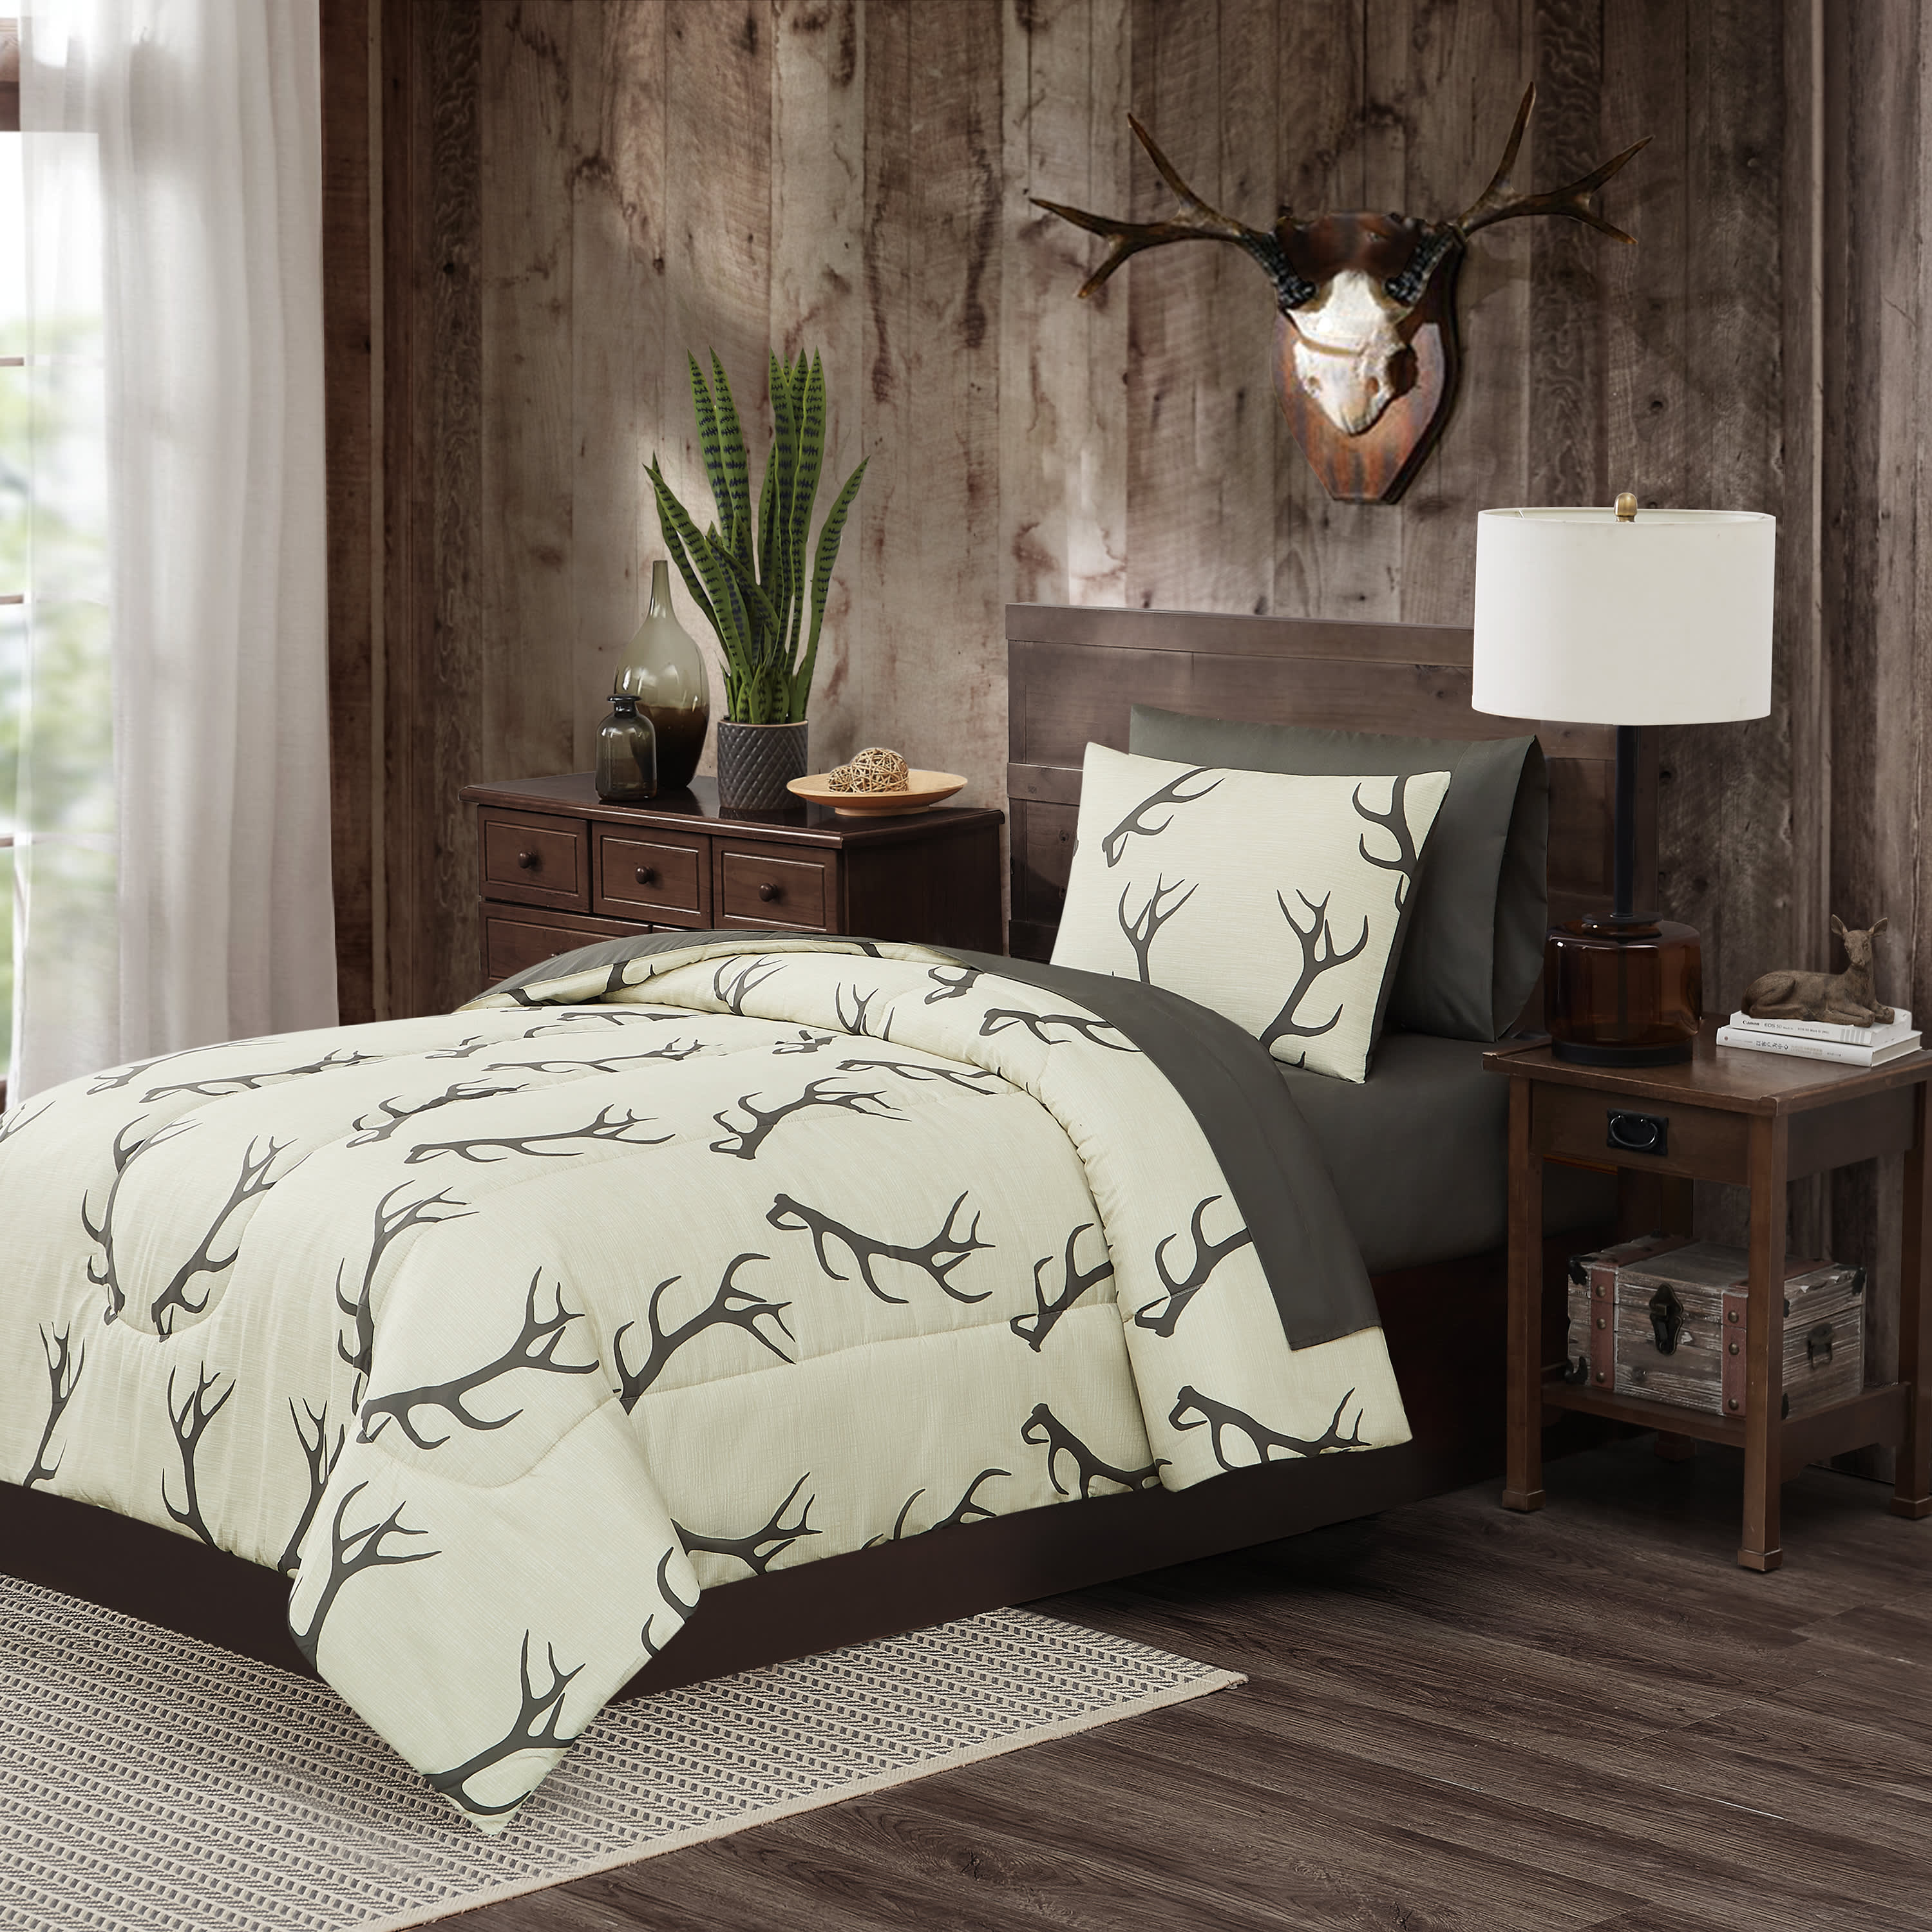 Lucky Textile Mills White River Lodge View Collection Bedding Set - Brown